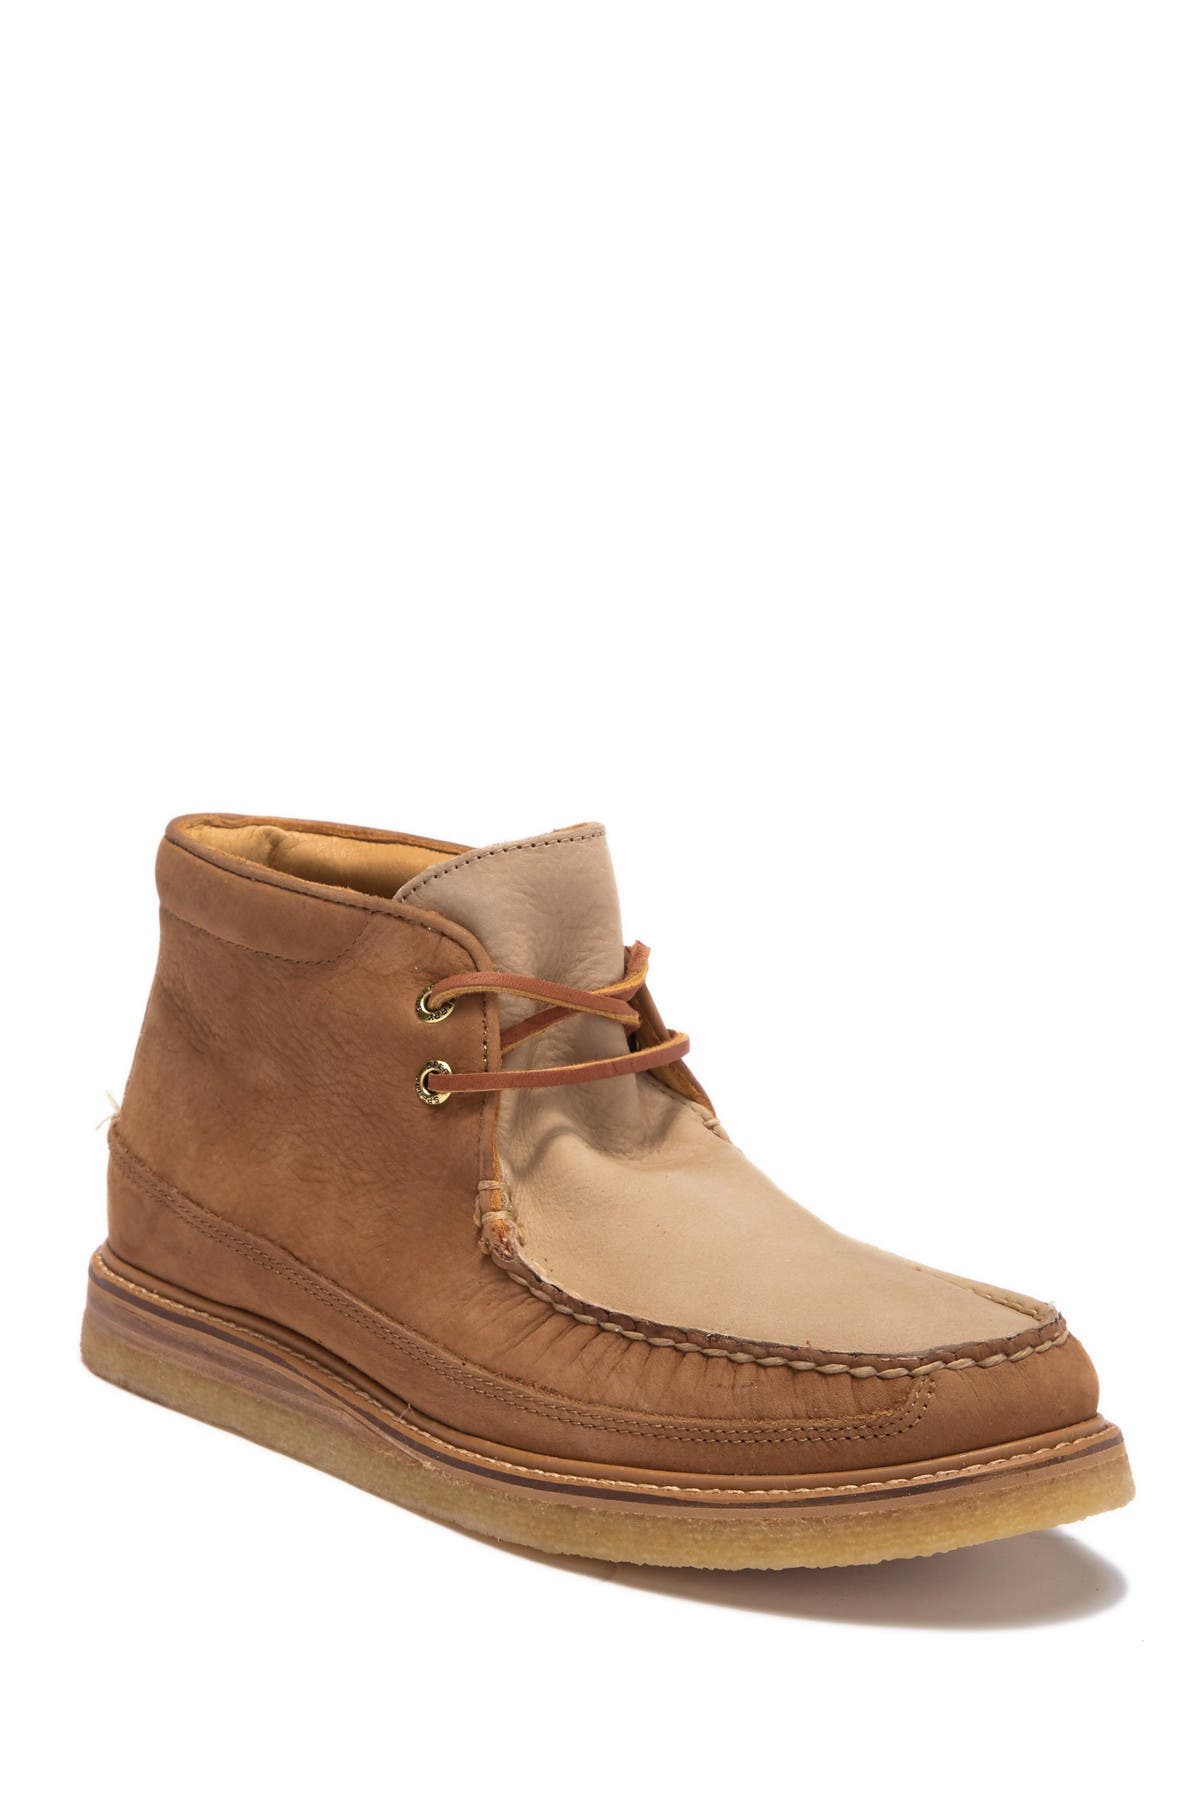 Sperry | Gold Crepe Leather Chukka Boot 